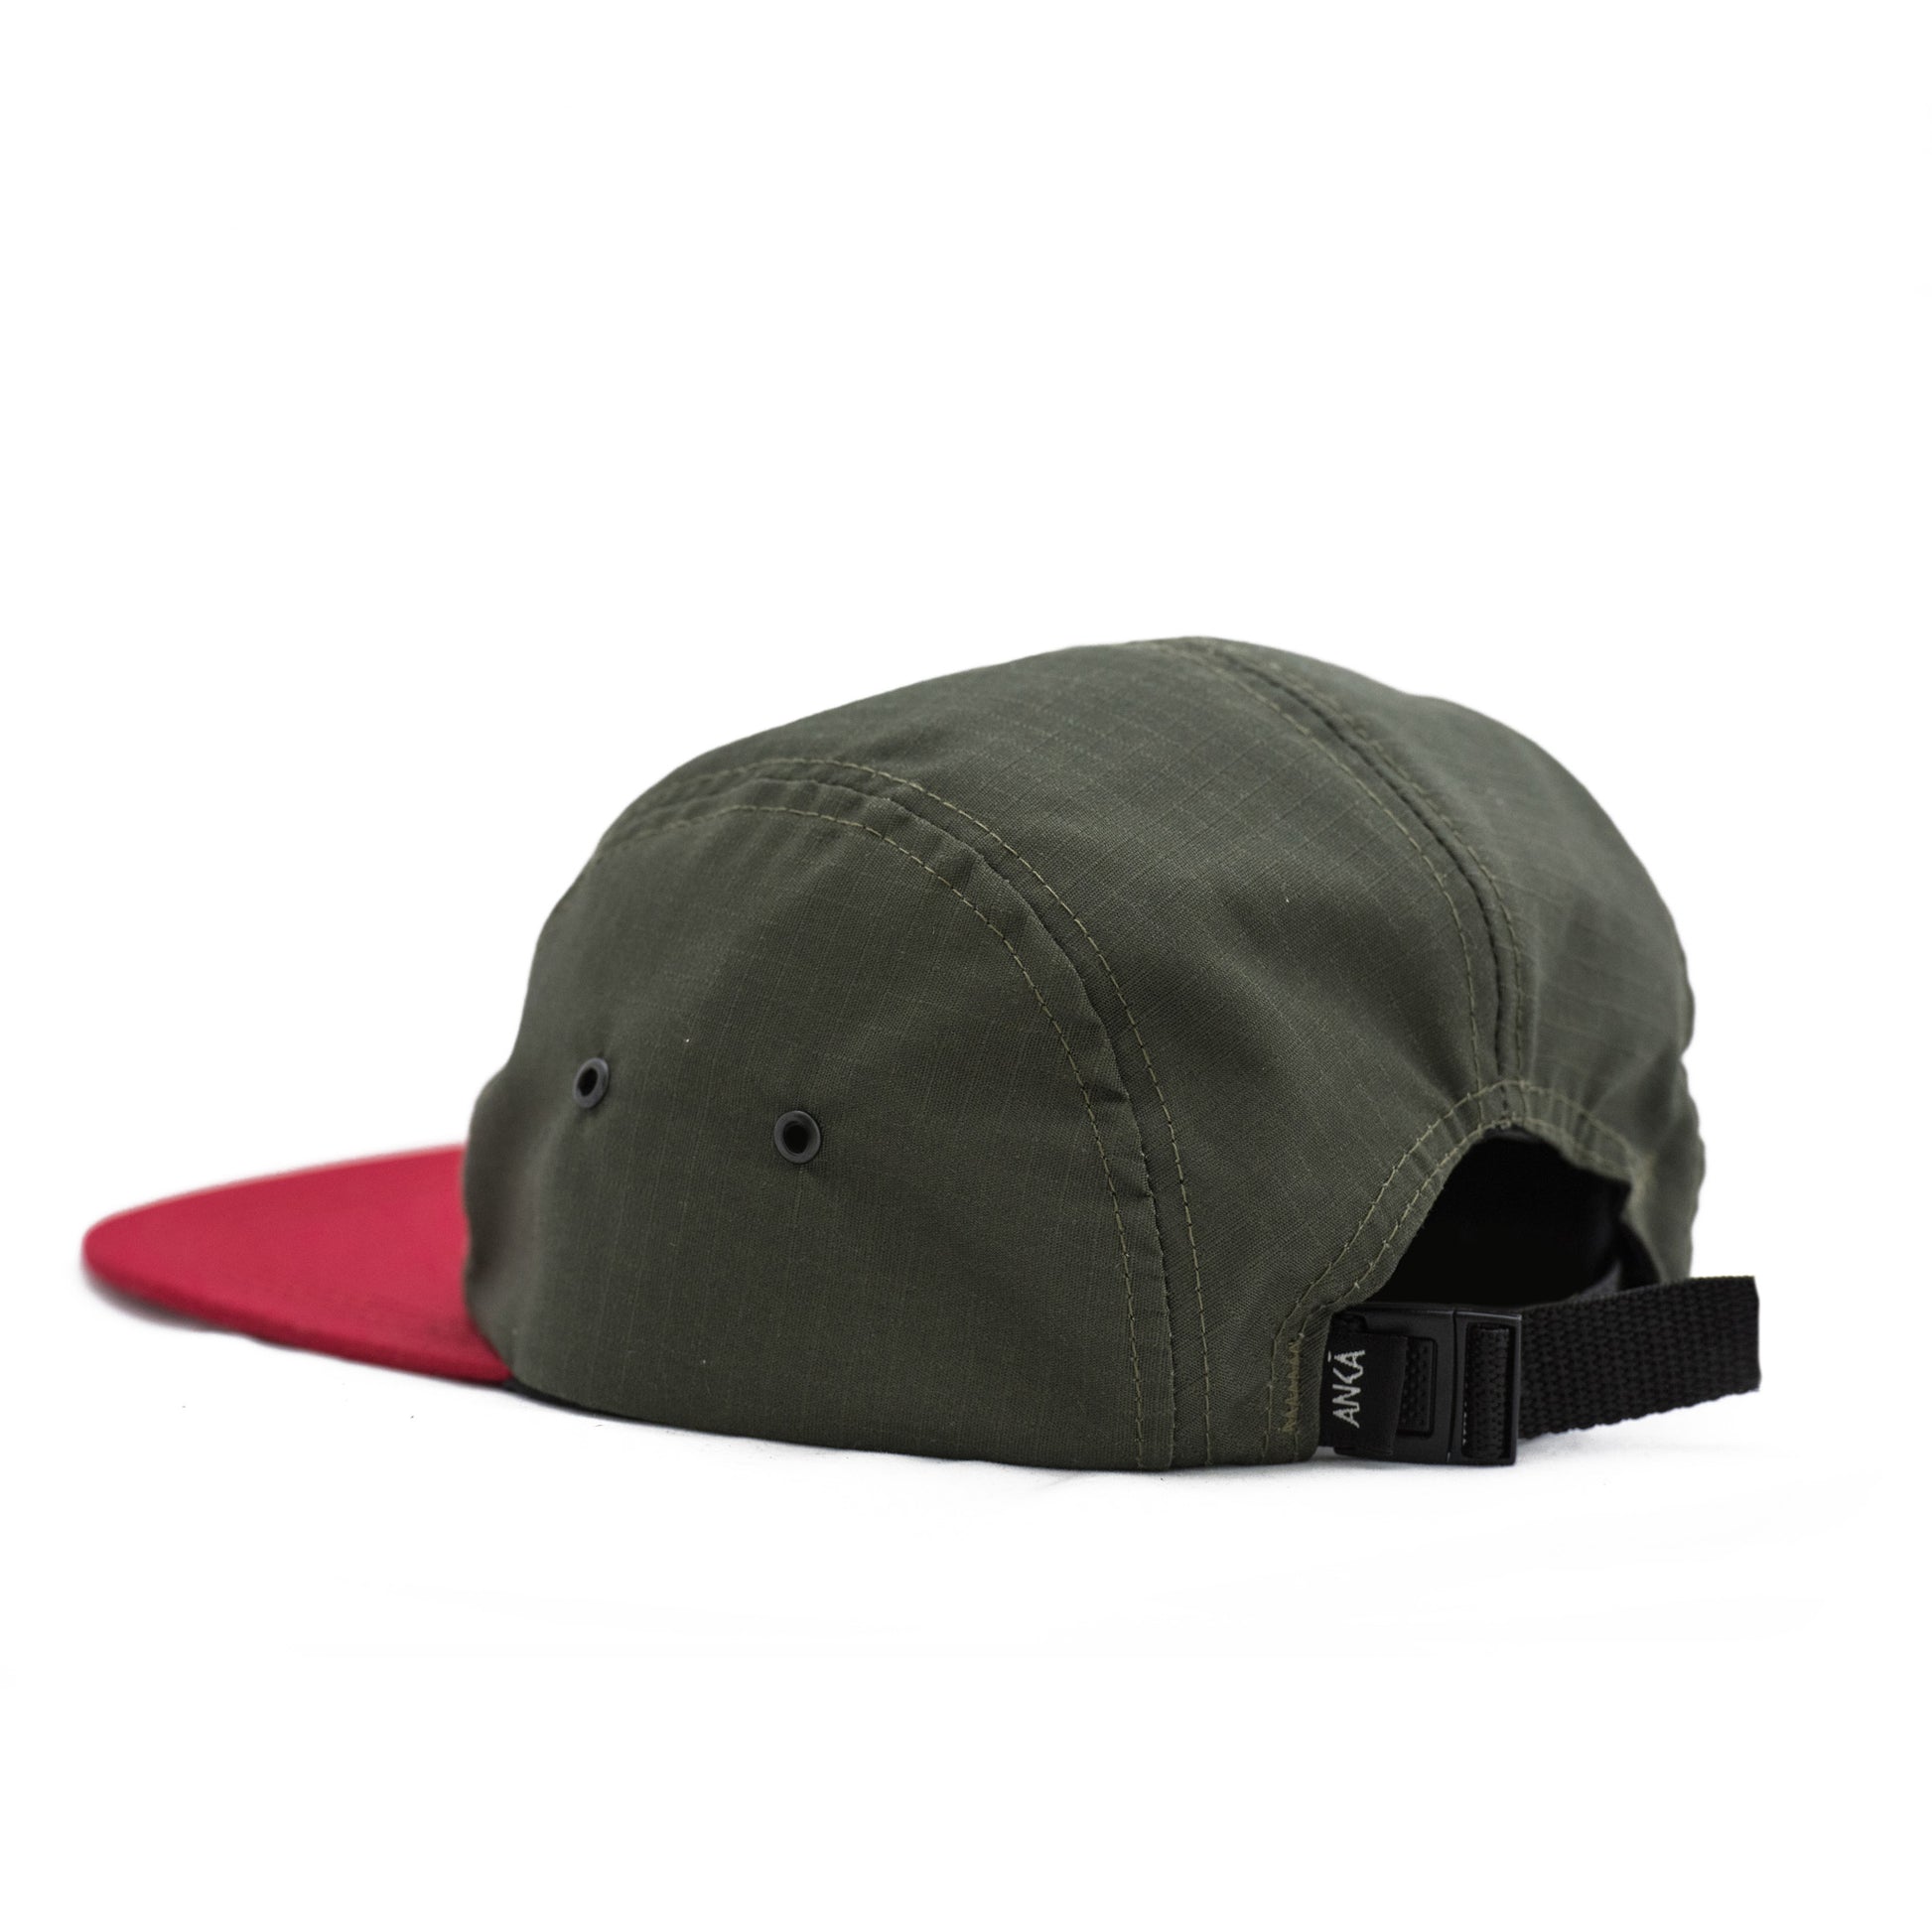 RED OLIVE 5 PANEL HAT - Ankā Supply Co